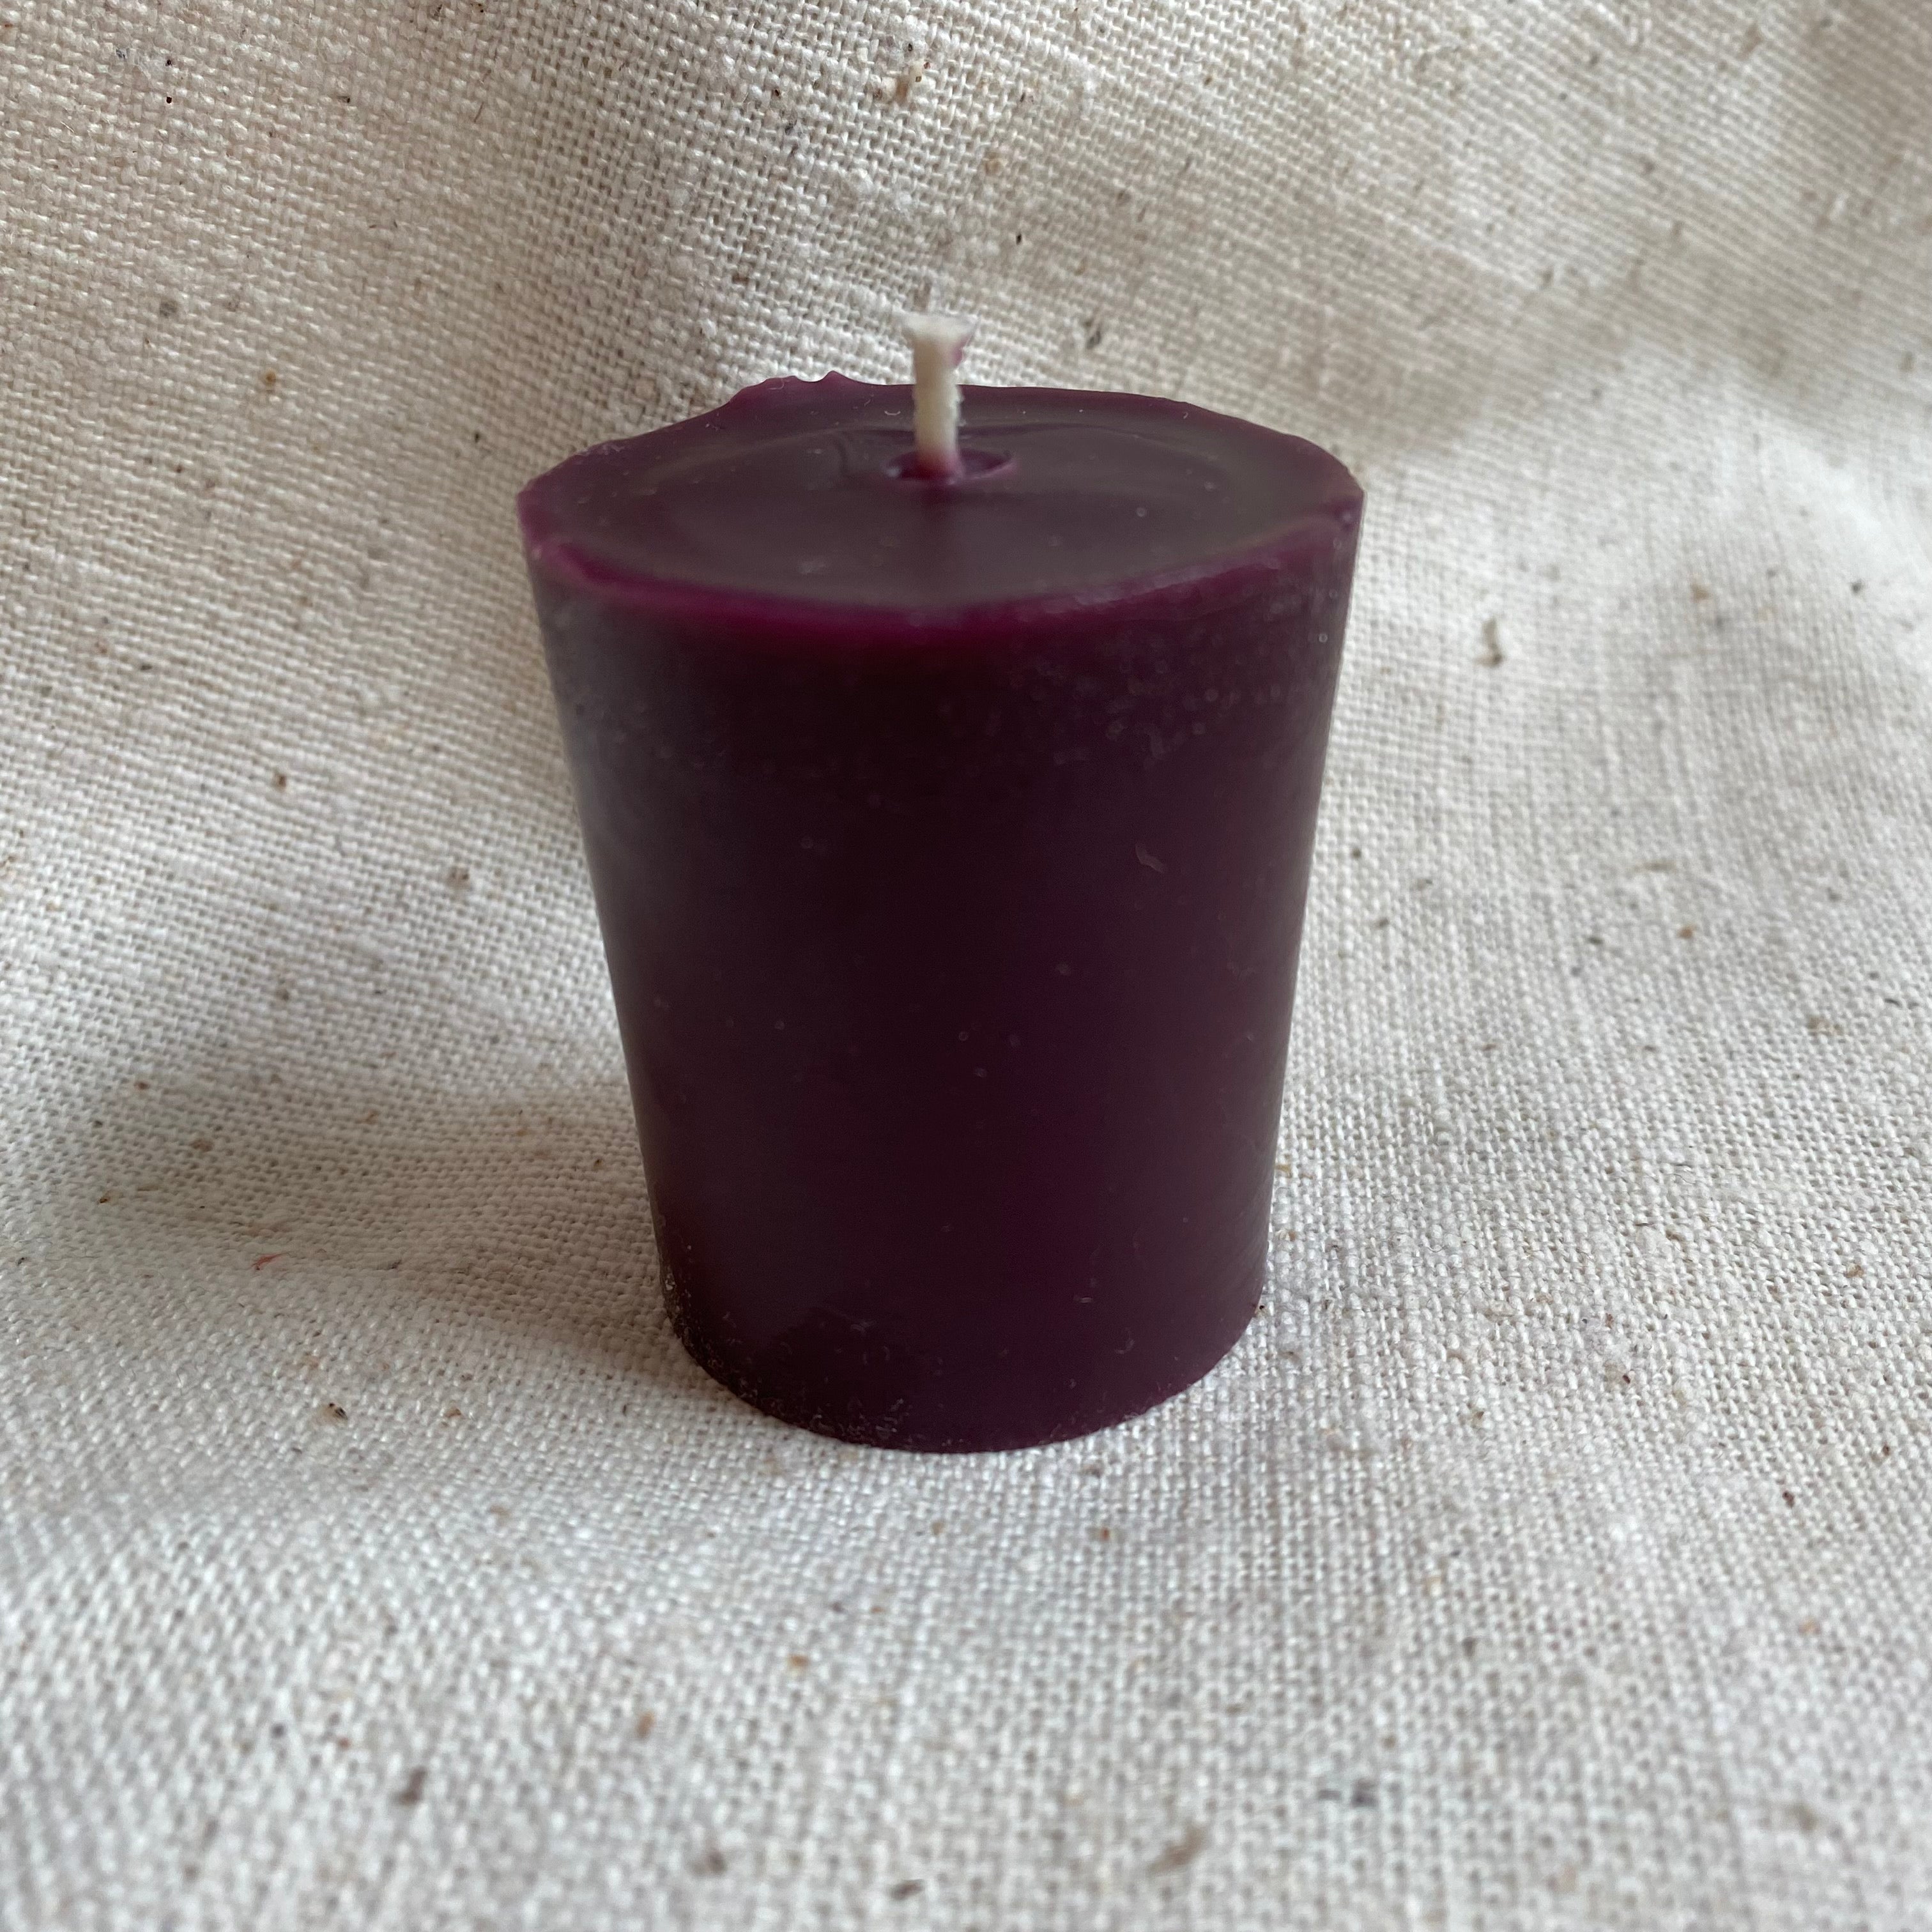 Votive Candle - 2 inch